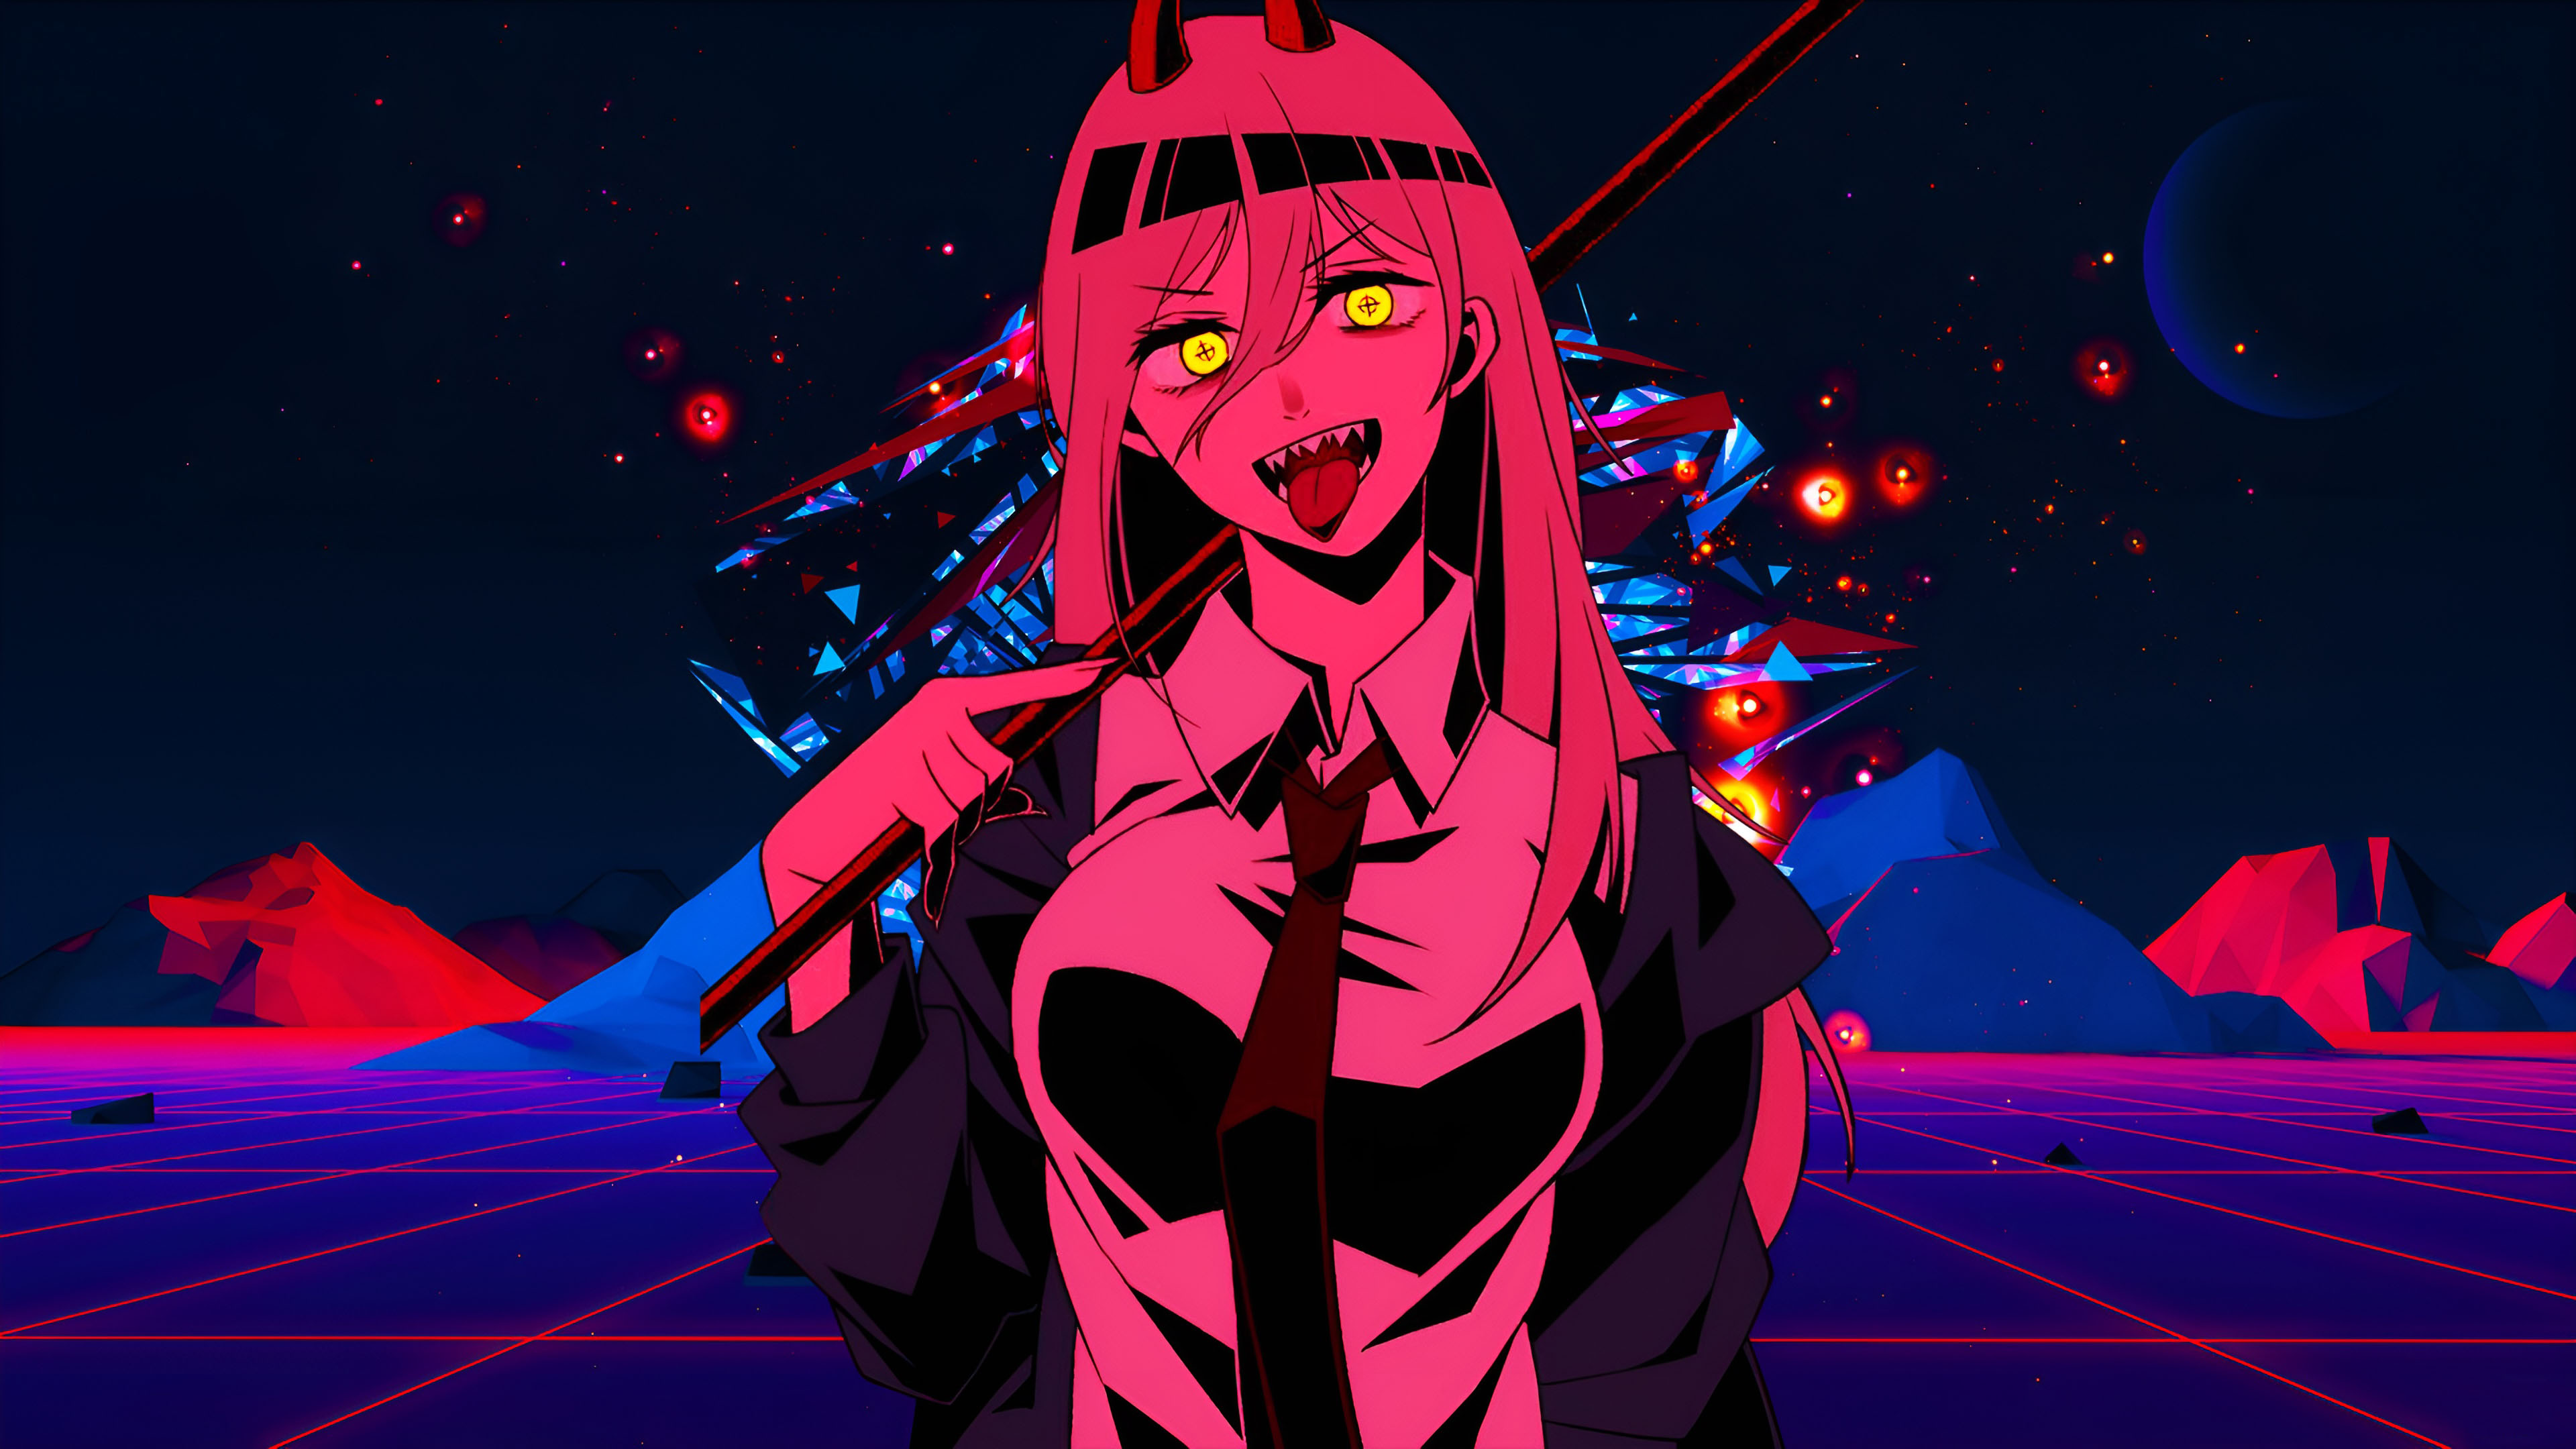 Chainsaw Man Power Chainsaw Man Vaporwave Anime Girls Tongue Out Wallpaper  - Resolution:3840x2160 - ID:1362101 